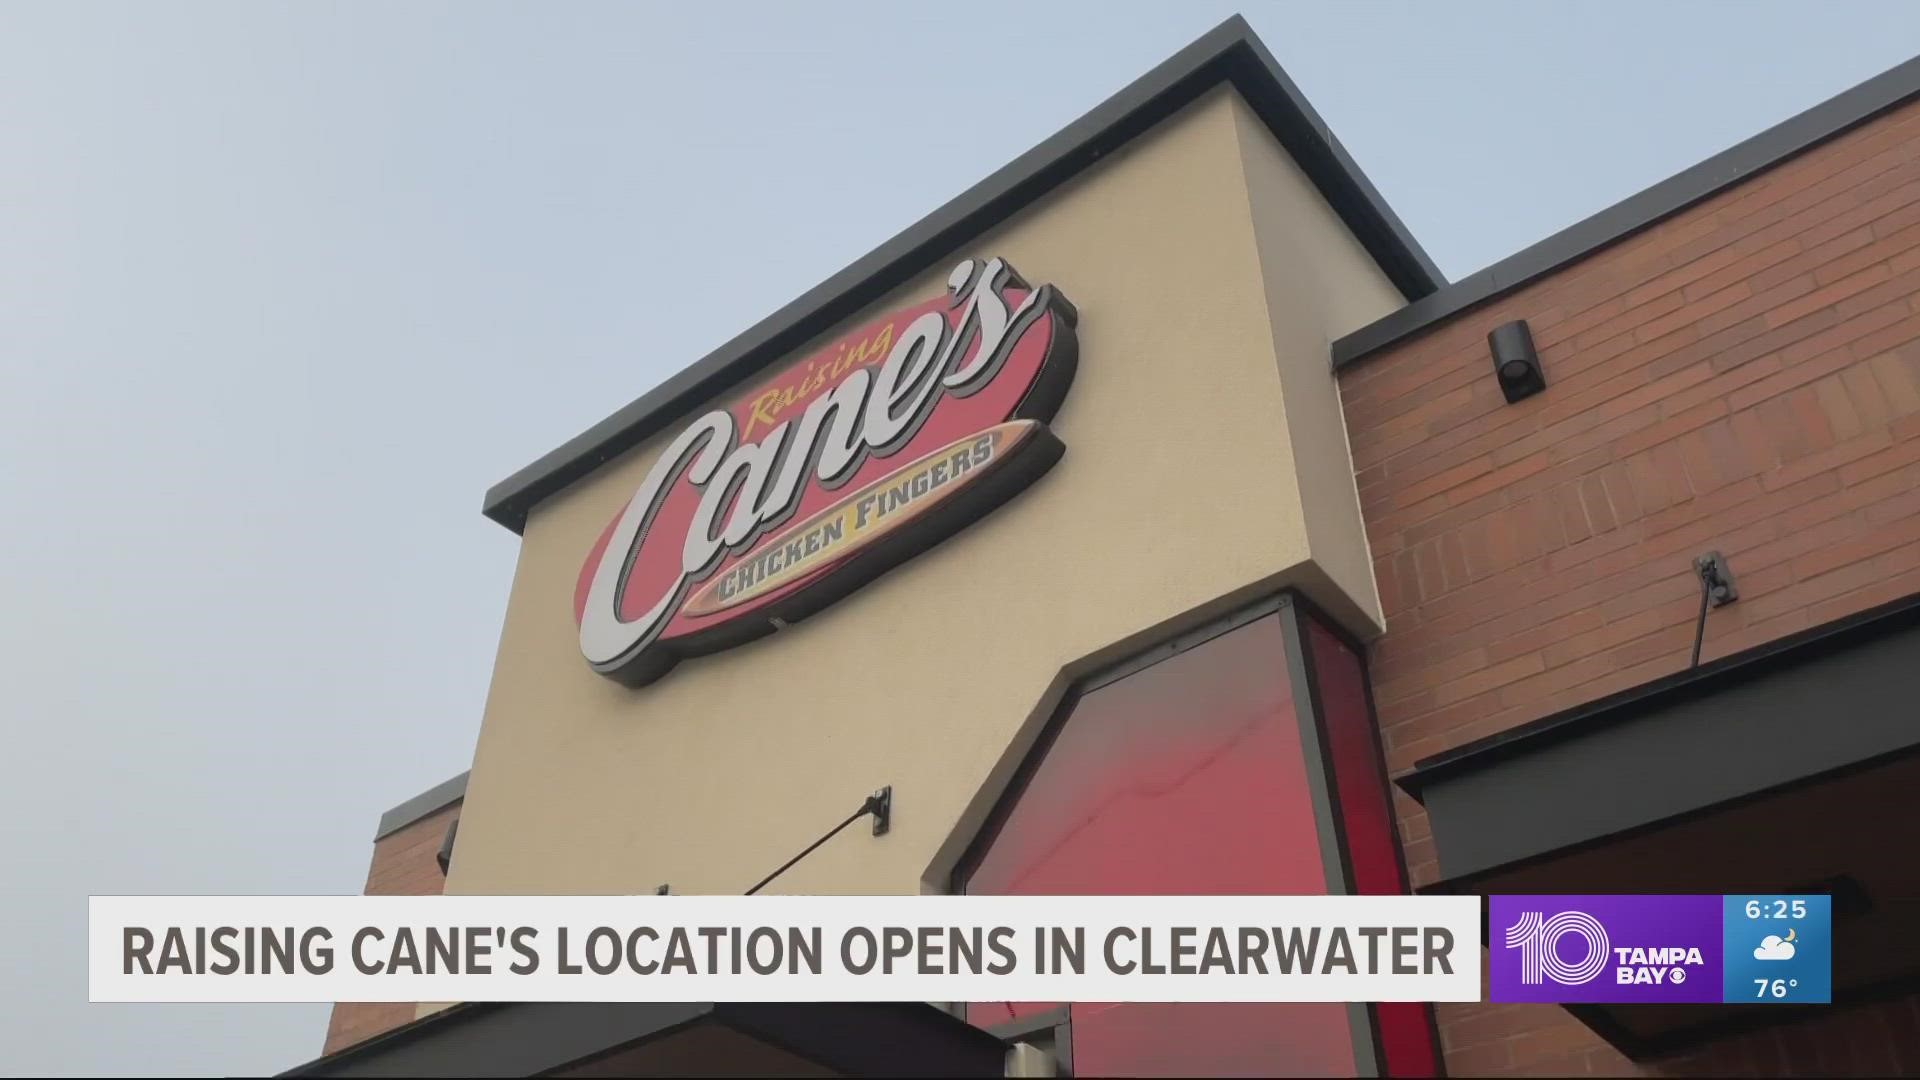 Twenty lucky customers will have a chance to win free Cane's for a year.